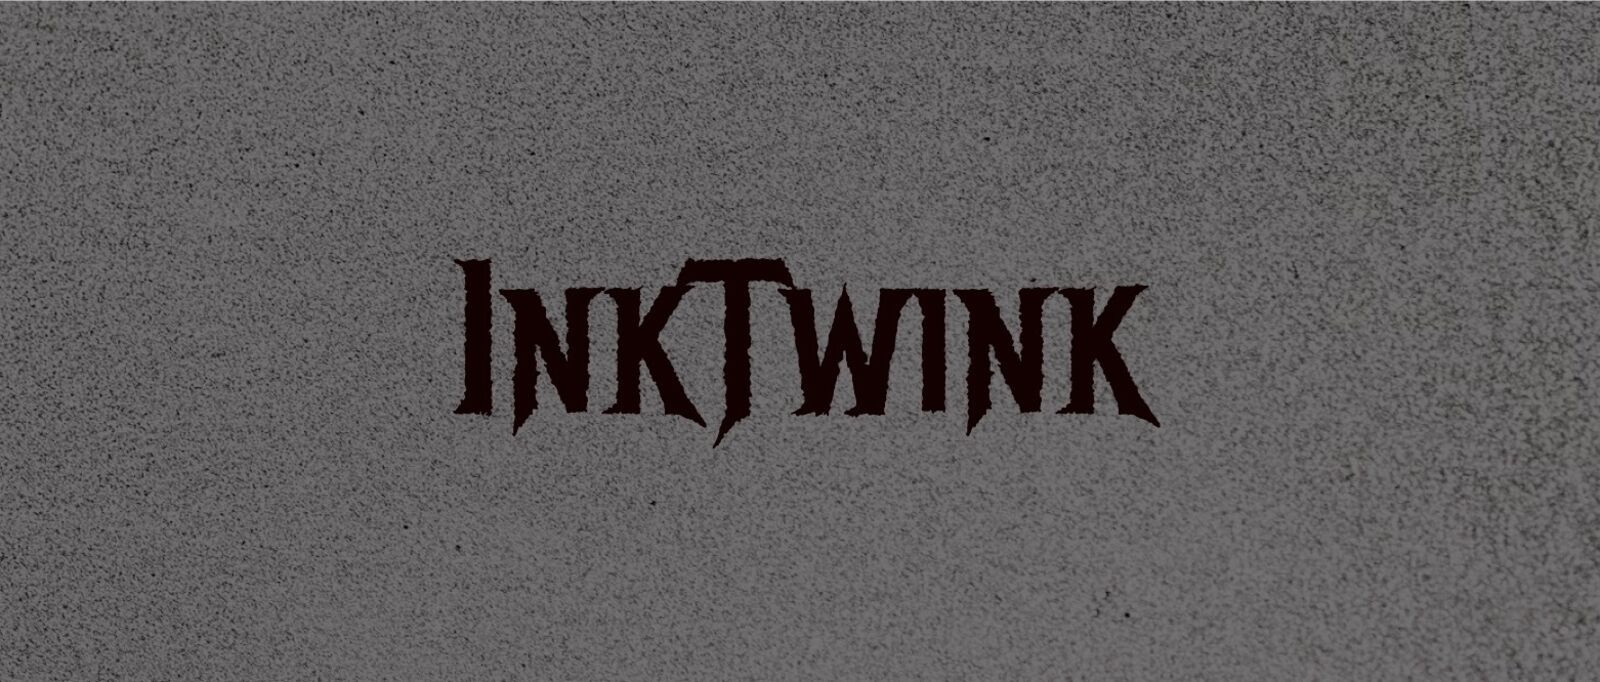 See InkTwink profile